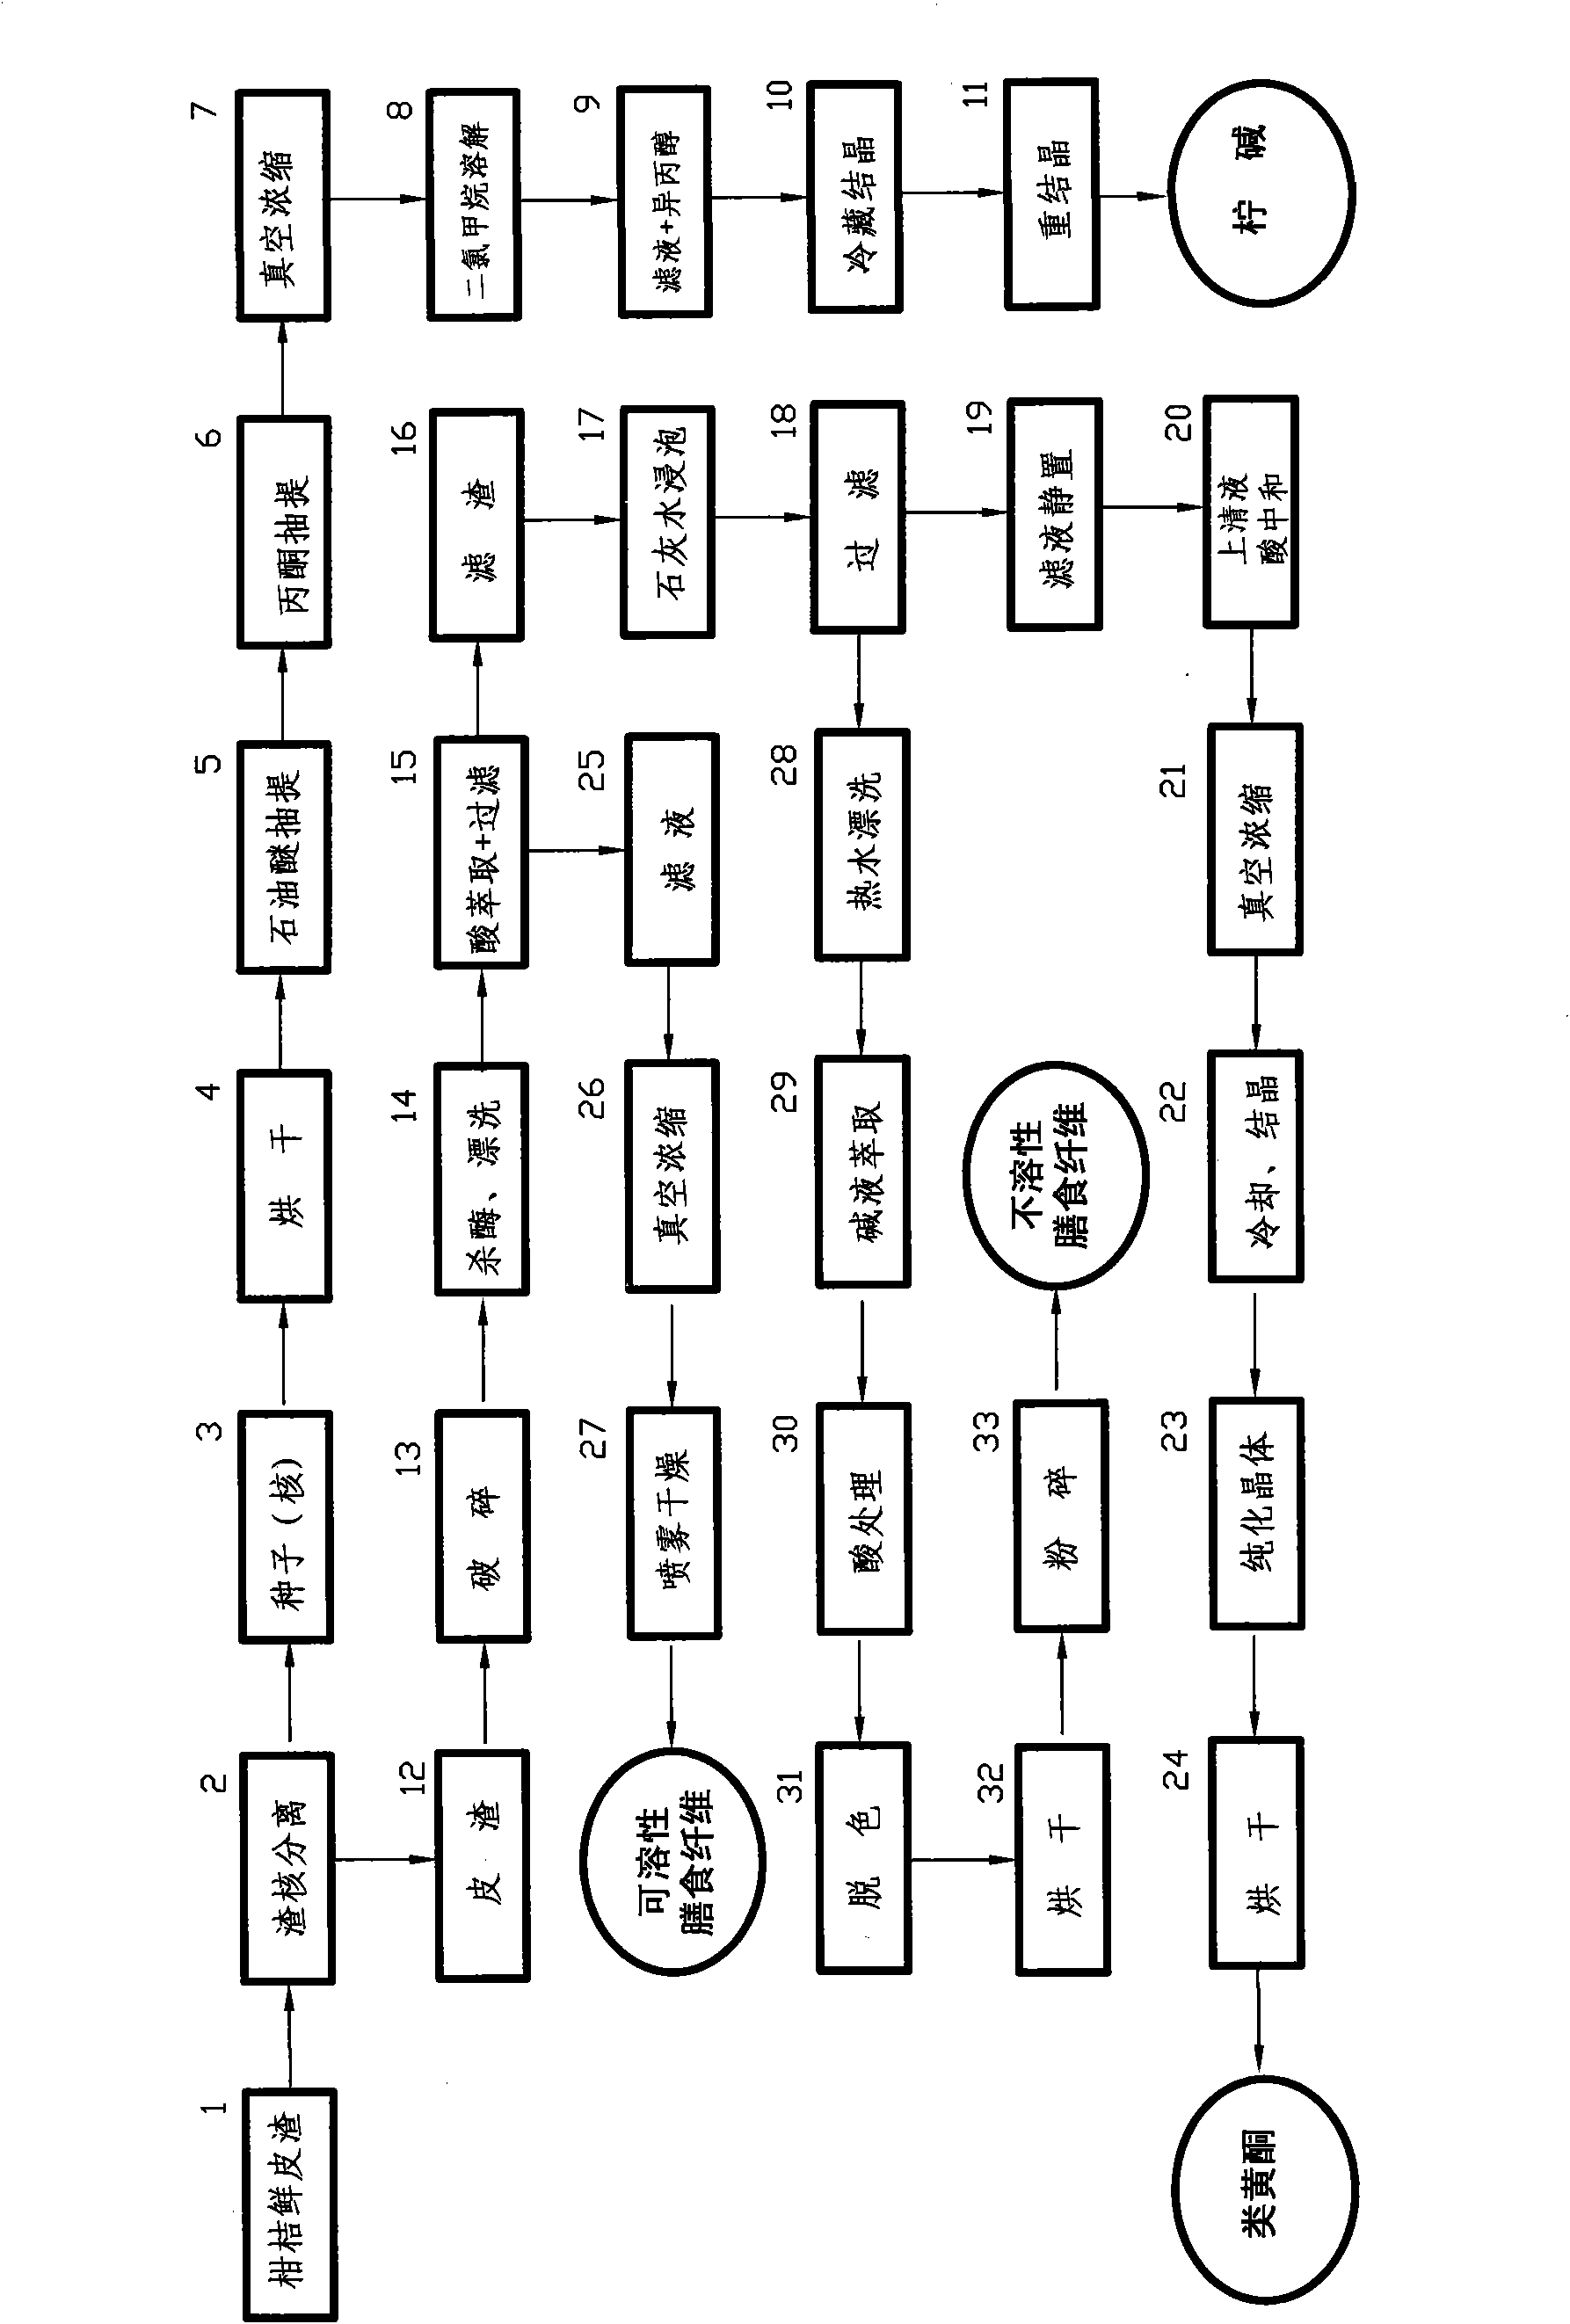 Process for hierarchically extracting limonin, flavonoid and dietary fiber from orange peel residues